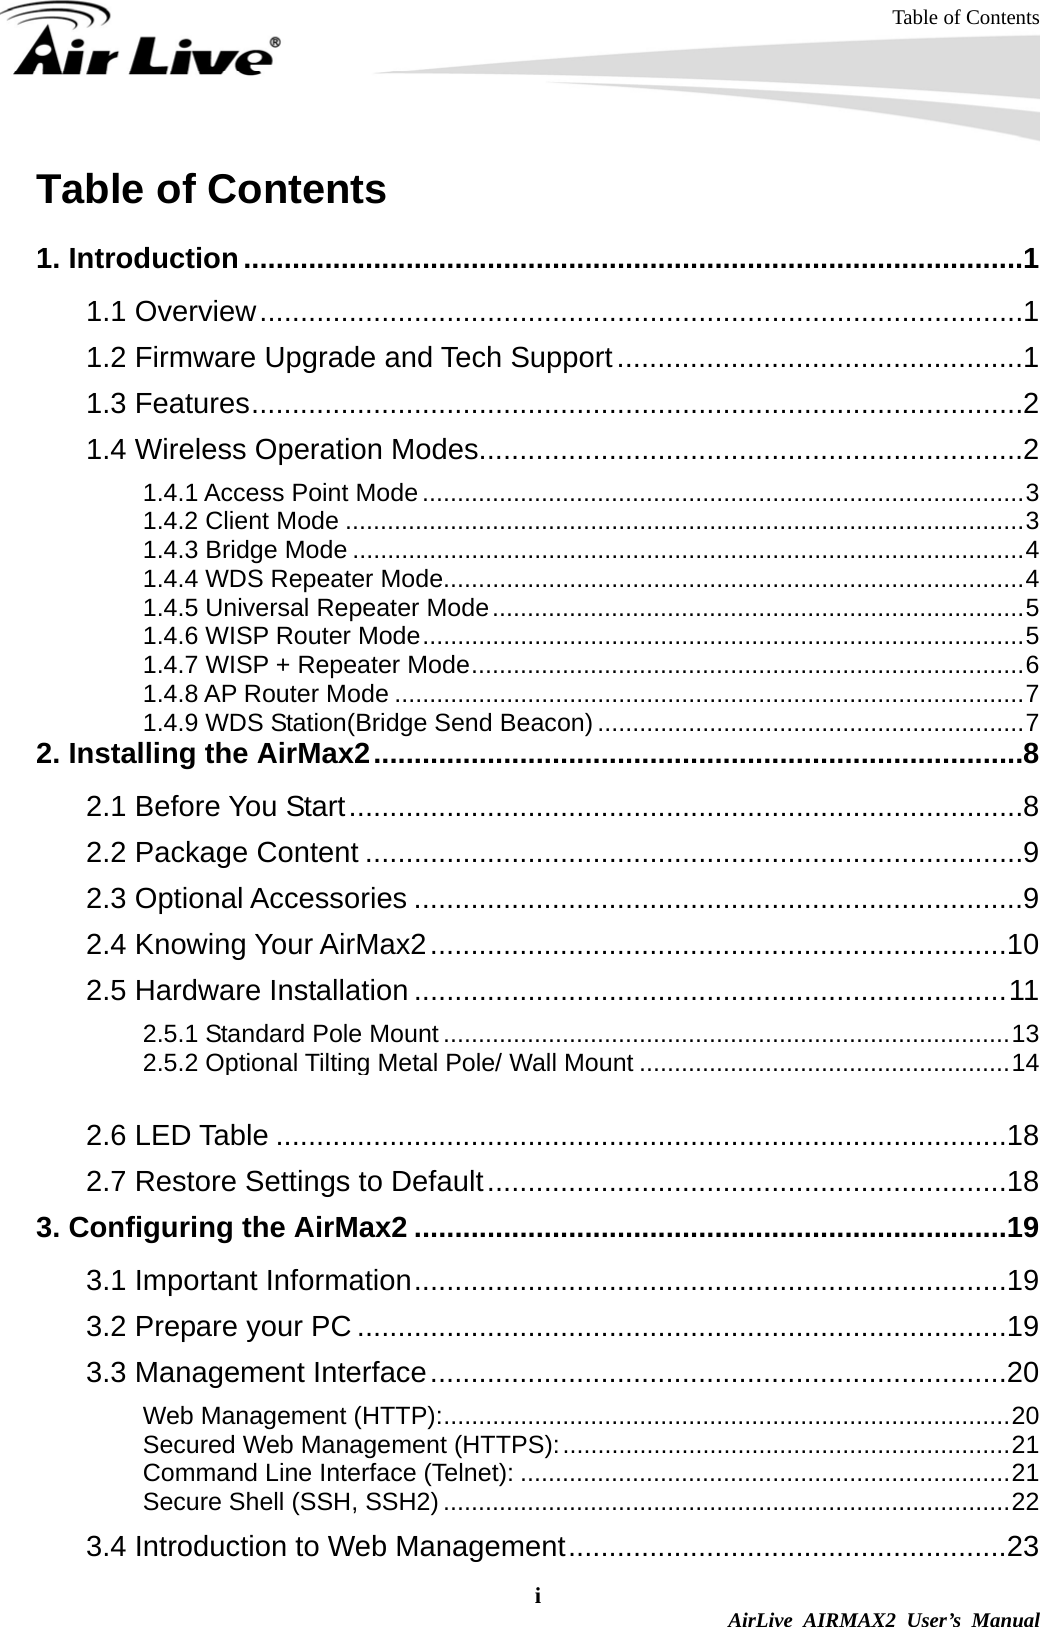 Table of Contents i  AirLive AIRMAX2 User’s Manual Table of Contents  1. Introduction................................................................................................1 1.1 Overview..............................................................................................1 1.2 Firmware Upgrade and Tech Support..................................................1 1.3 Features...............................................................................................2 1.4 Wireless Operation Modes...................................................................2 1.4.1 Access Point Mode ......................................................................................3 1.4.2 Client Mode .................................................................................................3 1.4.3 Bridge Mode ................................................................................................4 1.4.4 WDS Repeater Mode...................................................................................4 1.4.5 Universal Repeater Mode............................................................................5 1.4.6 WISP Router Mode......................................................................................5 1.4.7 WISP + Repeater Mode...............................................................................6 1.4.8 AP Router Mode ..........................................................................................7 1.4.9 WDS Station(Bridge Send Beacon) .............................................................7 2. Installing the AirMax2................................................................................8 2.1 Before You Start...................................................................................8 2.2 Package Content .................................................................................9 2.3 Optional Accessories ...........................................................................9 2.4 Knowing Your AirMax2.......................................................................10 2.5 Hardware Installation .........................................................................11 2.5.1 Standard Pole Mount .................................................................................13 2.5.2 Optional Tilting Metal Pole/ Wall Mount .....................................................14 2.5.3 Installing External Antenna ........................................................................16 2.6 LED Table ..........................................................................................18 2.7 Restore Settings to Default................................................................18 3. Configuring the AirMax2 .........................................................................19 3.1 Important Information.........................................................................19 3.2 Prepare your PC ................................................................................19 3.3 Management Interface.......................................................................20 Web Management (HTTP):.................................................................................20 Secured Web Management (HTTPS):................................................................21 Command Line Interface (Telnet): ......................................................................21 Secure Shell (SSH, SSH2) .................................................................................22 3.4 Introduction to Web Management......................................................23 